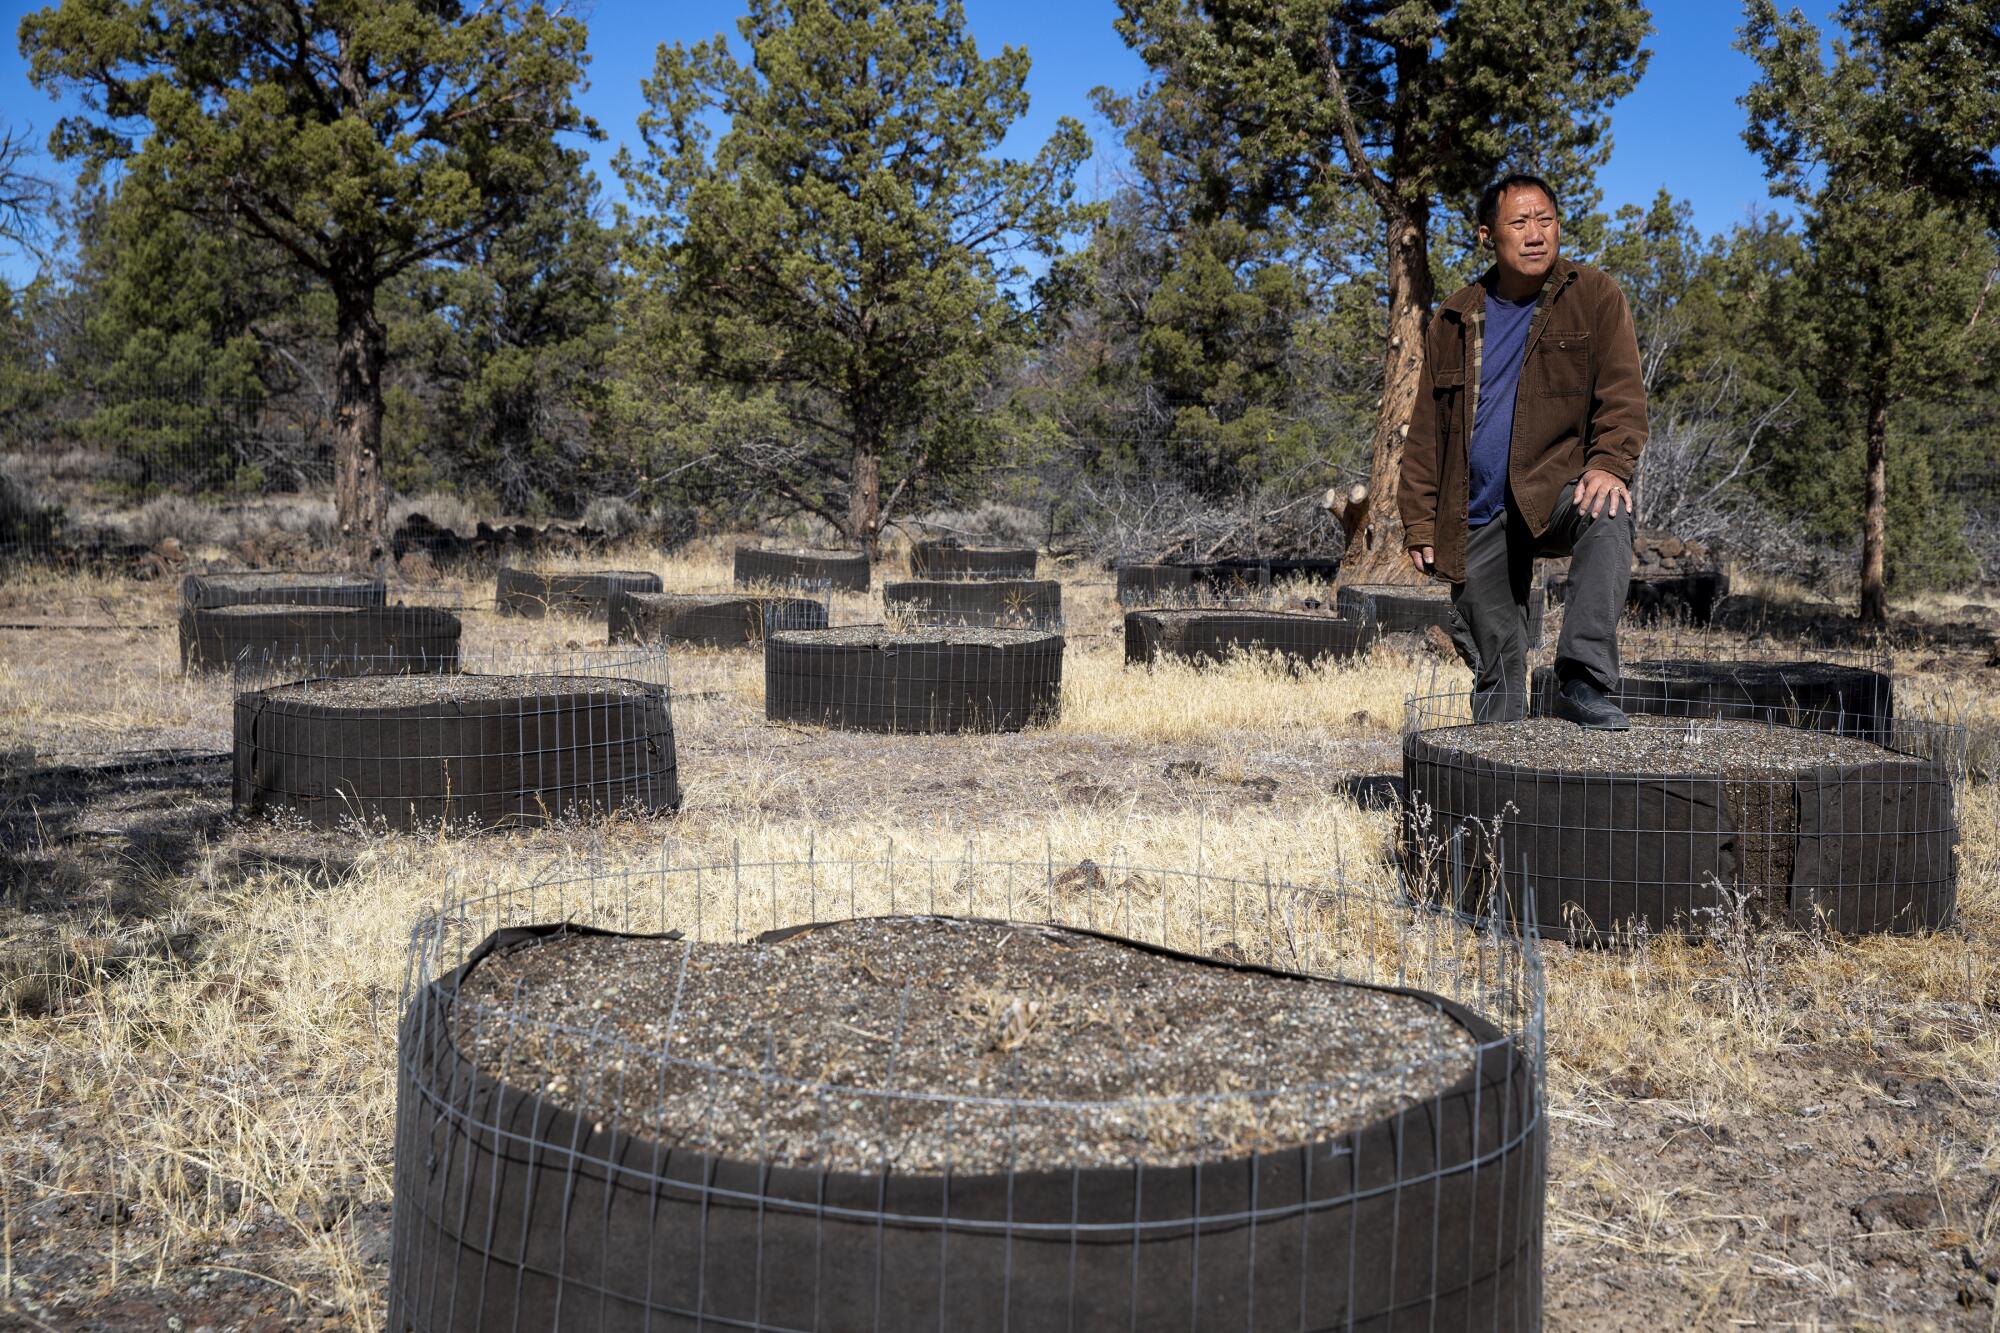 Hmong retiree Bee Xiong stands on a former outdoor marijuana grow his 40-acre ranch the Mount Shasta Vista subdivision